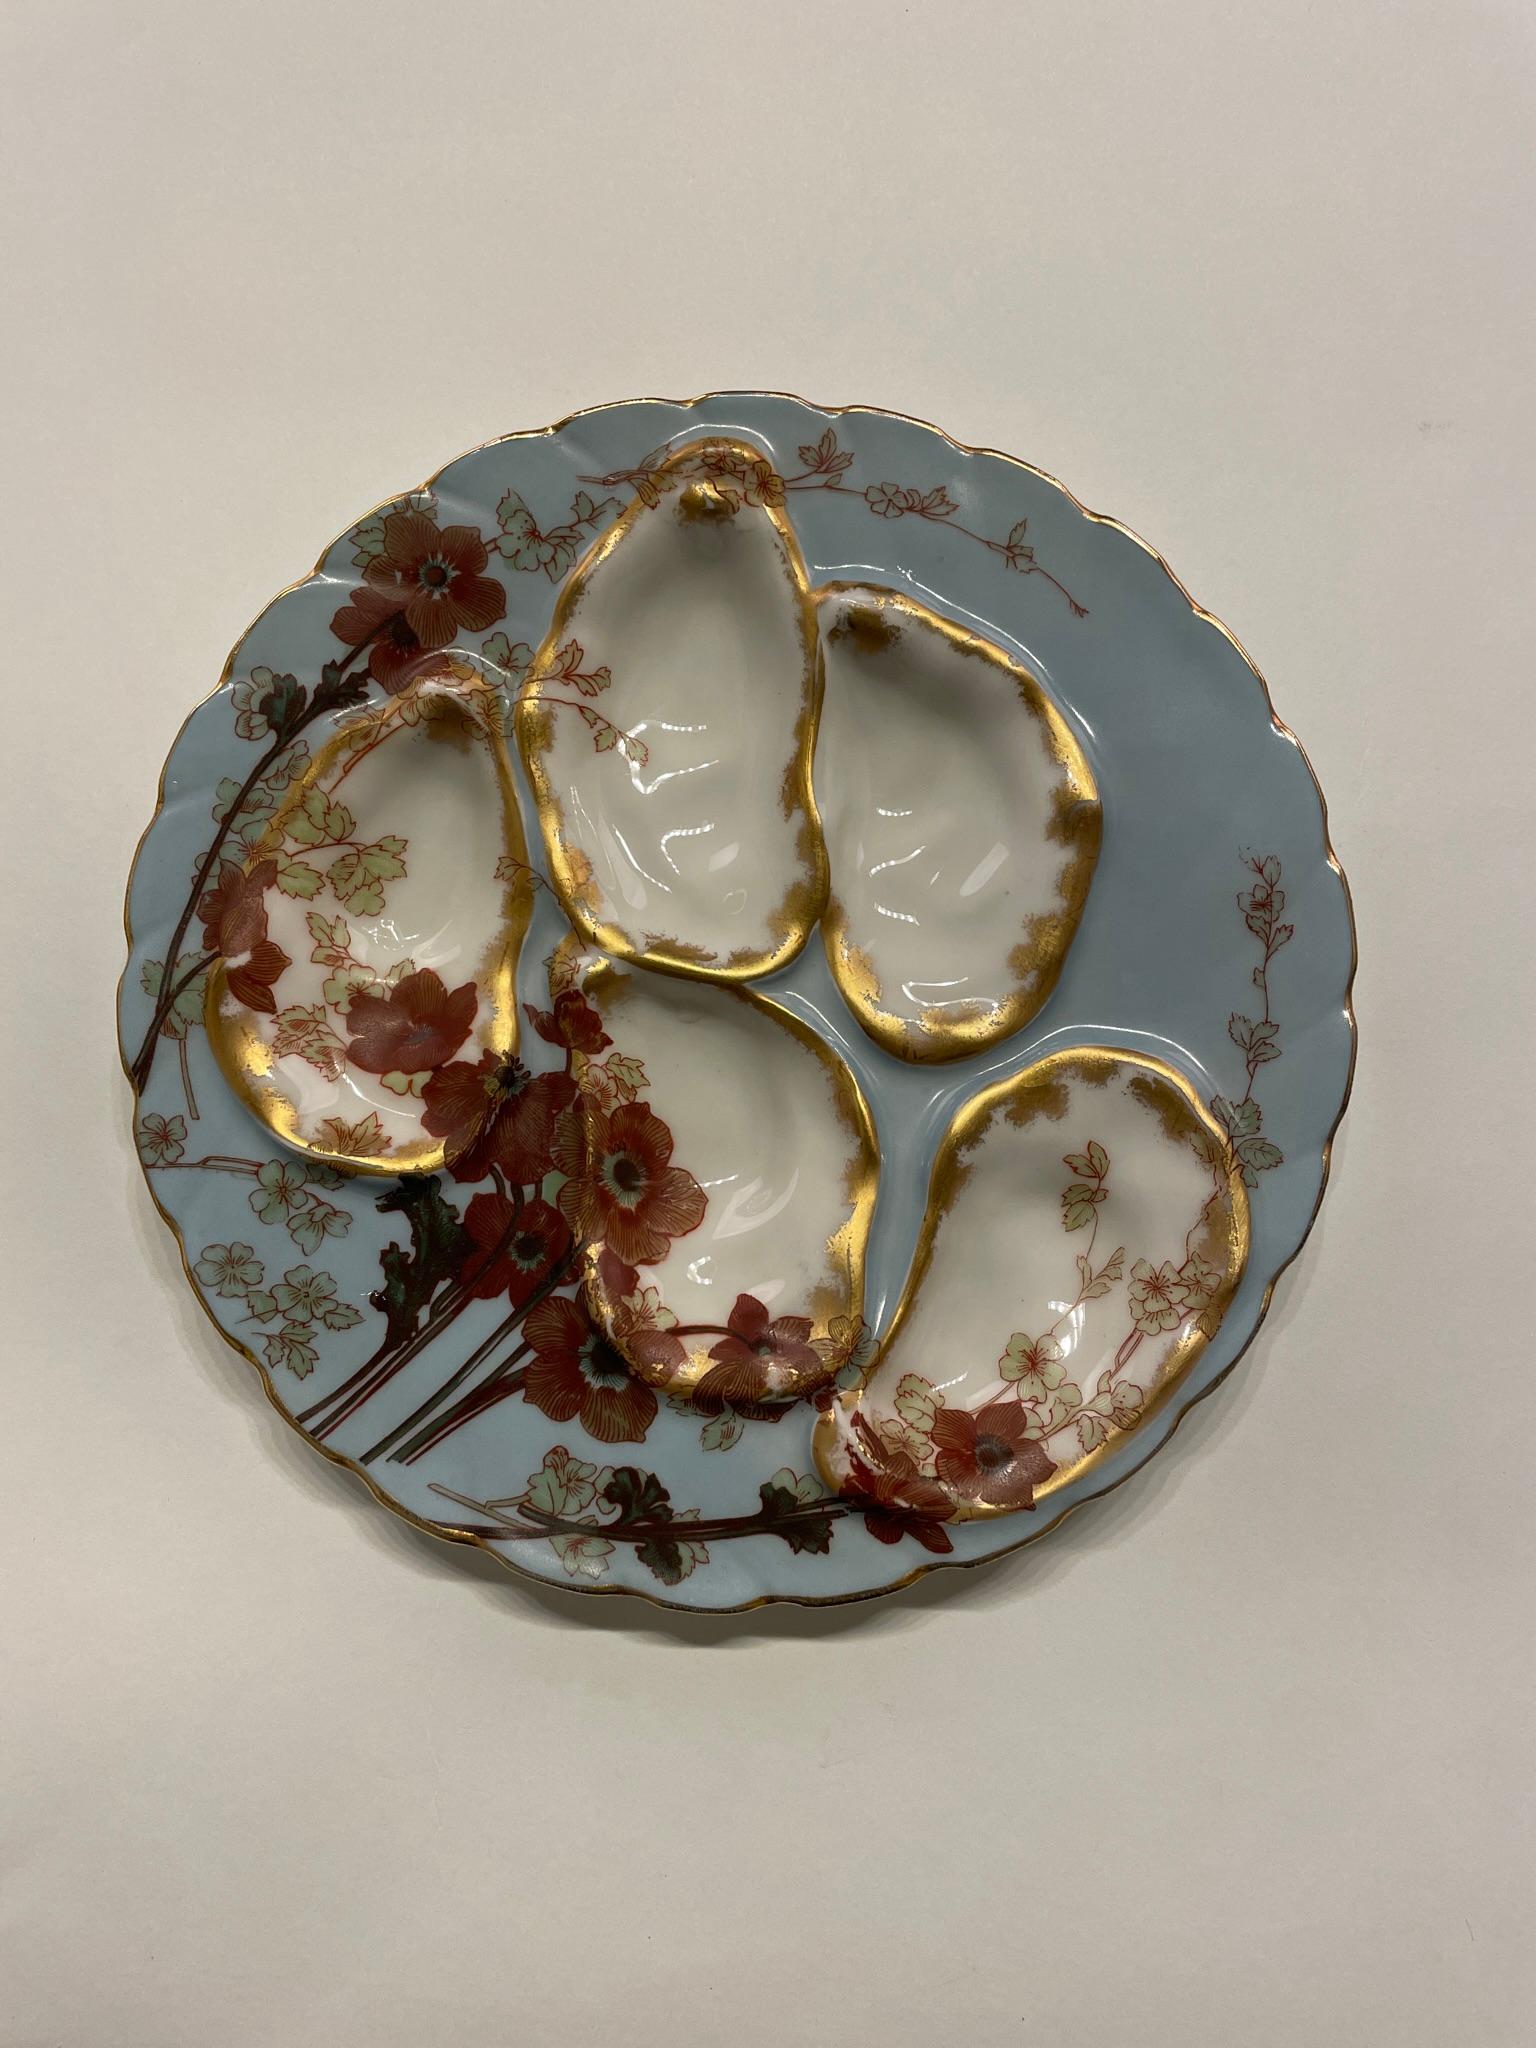 A fine Porcelain Oyster plate with gilded decor on a pale blue background. Stamped on the back Wright Tyndale & Van Roden in Philadelphia. Great condition. Dimensions are 7.75